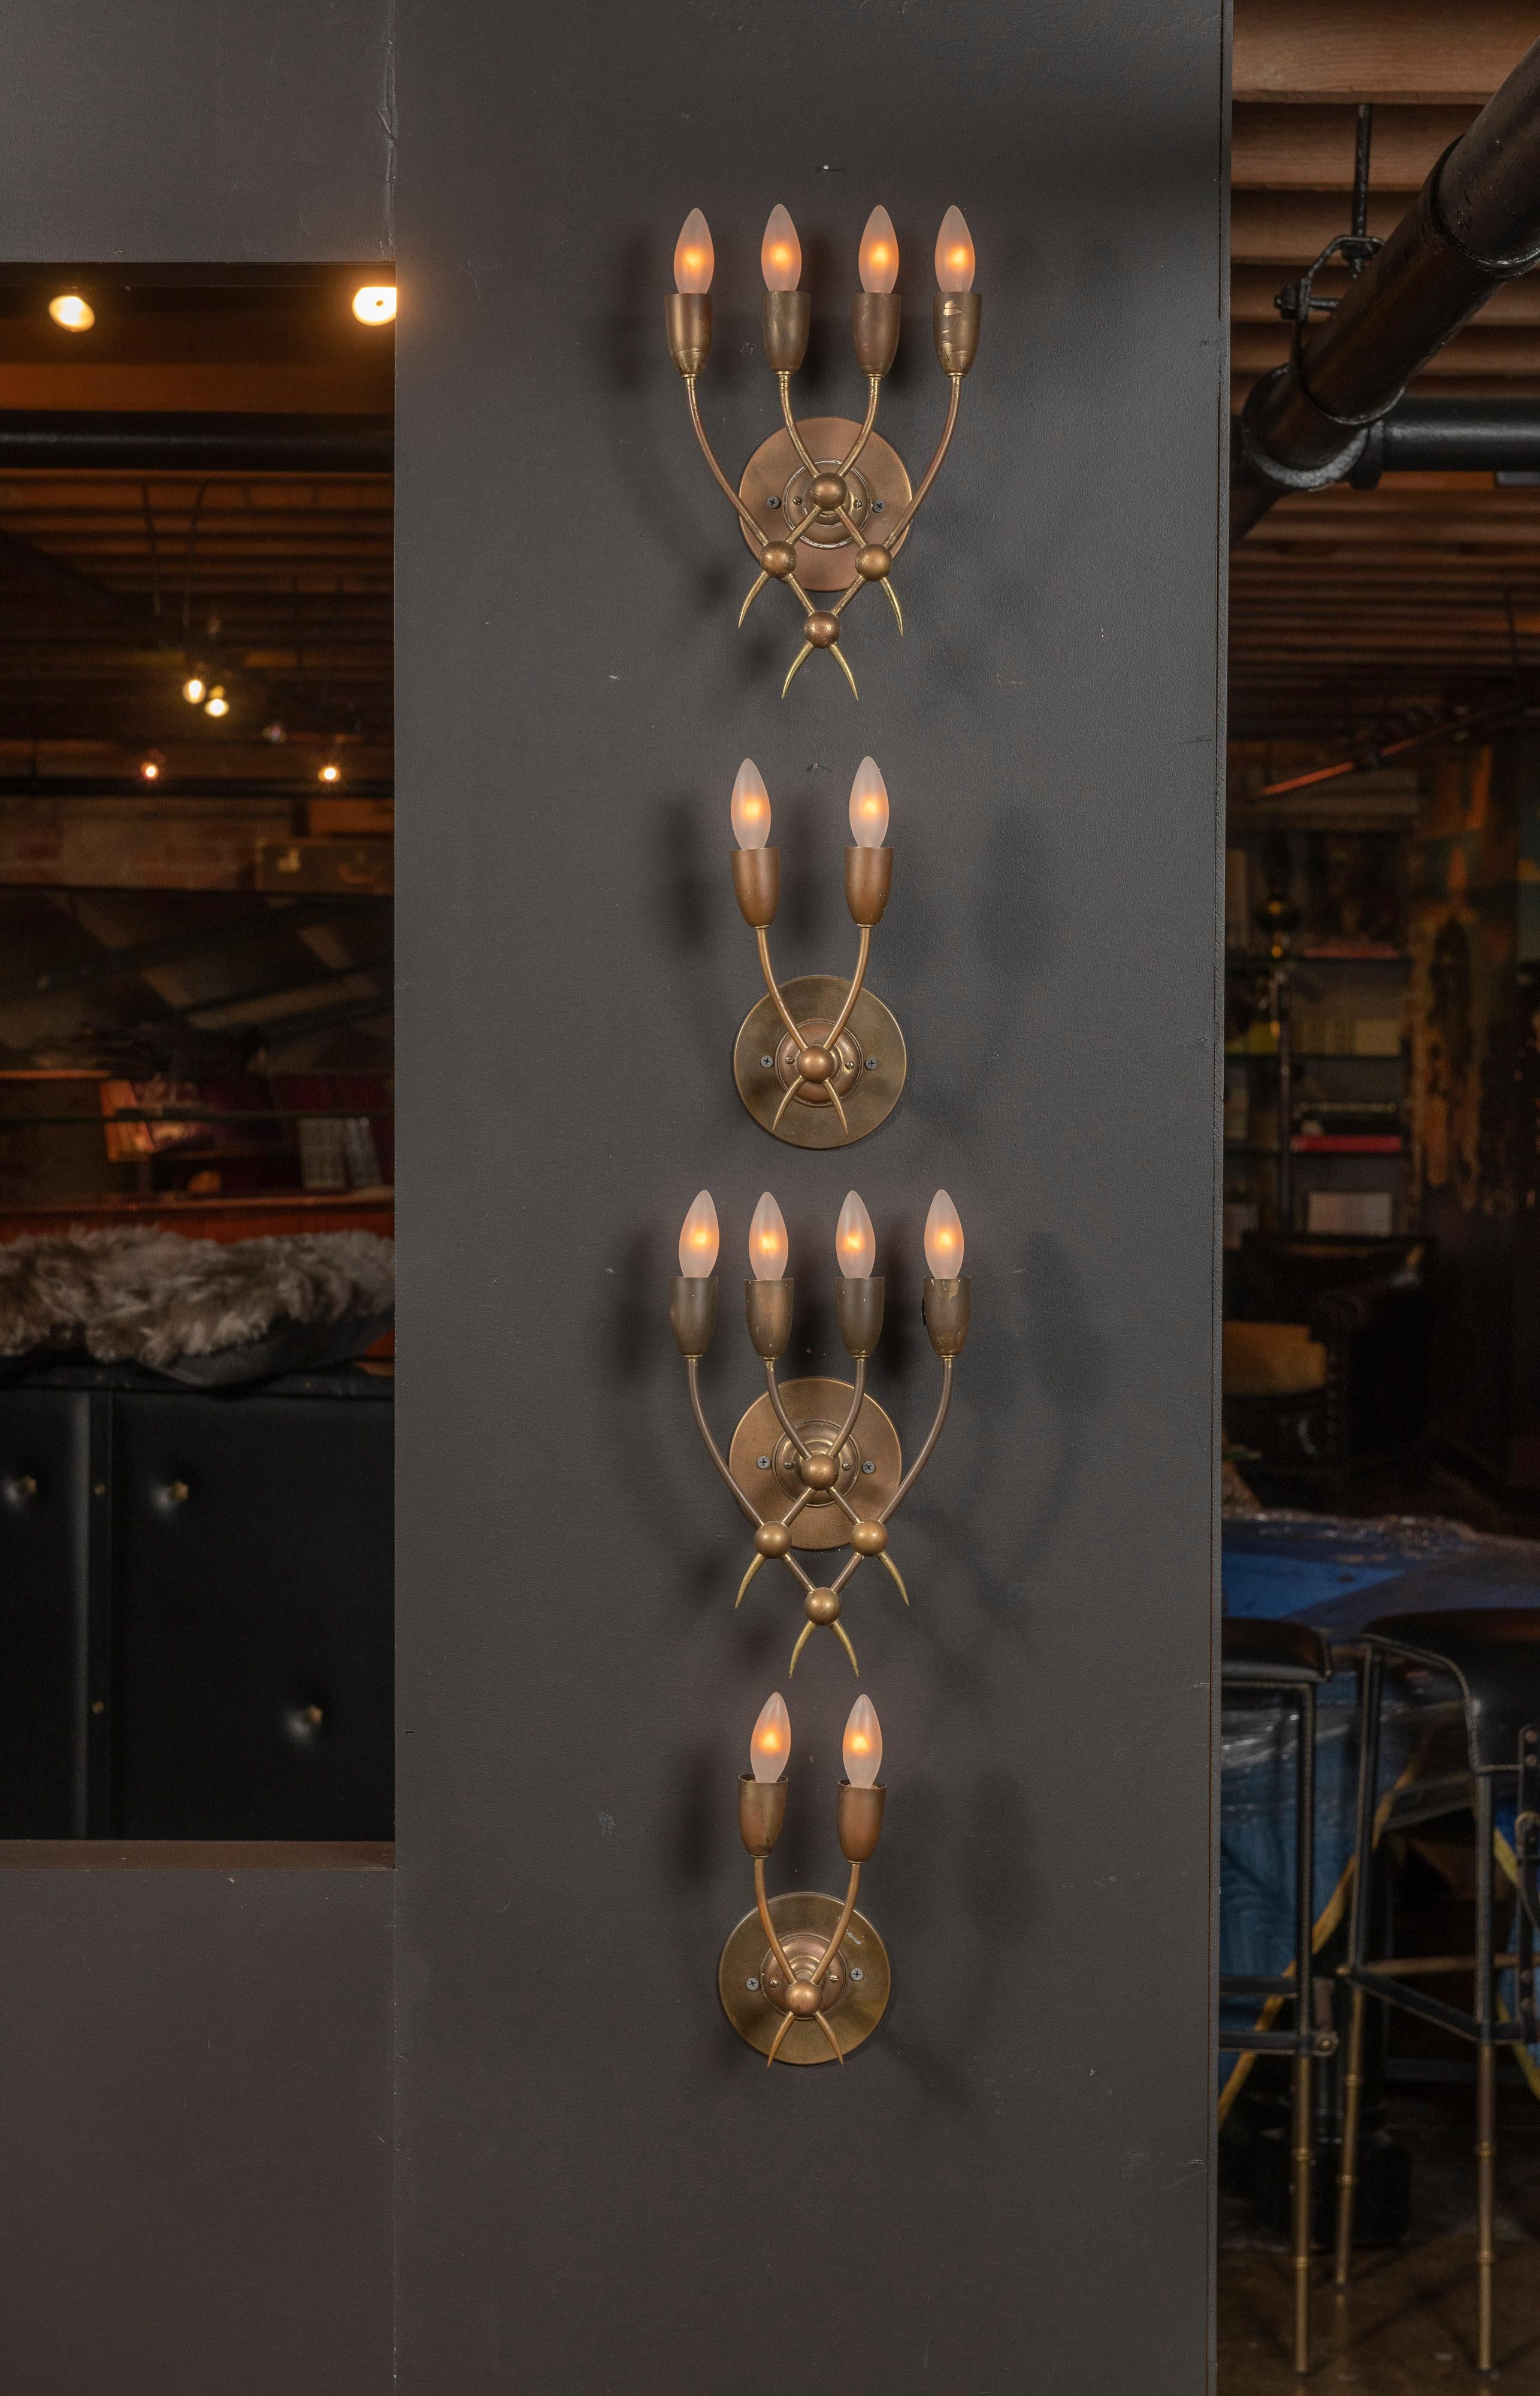 Pair of brass sconces manufactured by Guglielmo Ulrich in Italy circa late 1930s - early 1940s. Wired for US junction boxes. Each sconce takes four E14 European candelabra bulbs. Gorgeous patina.

Second pair of sconces seen in photographs appear